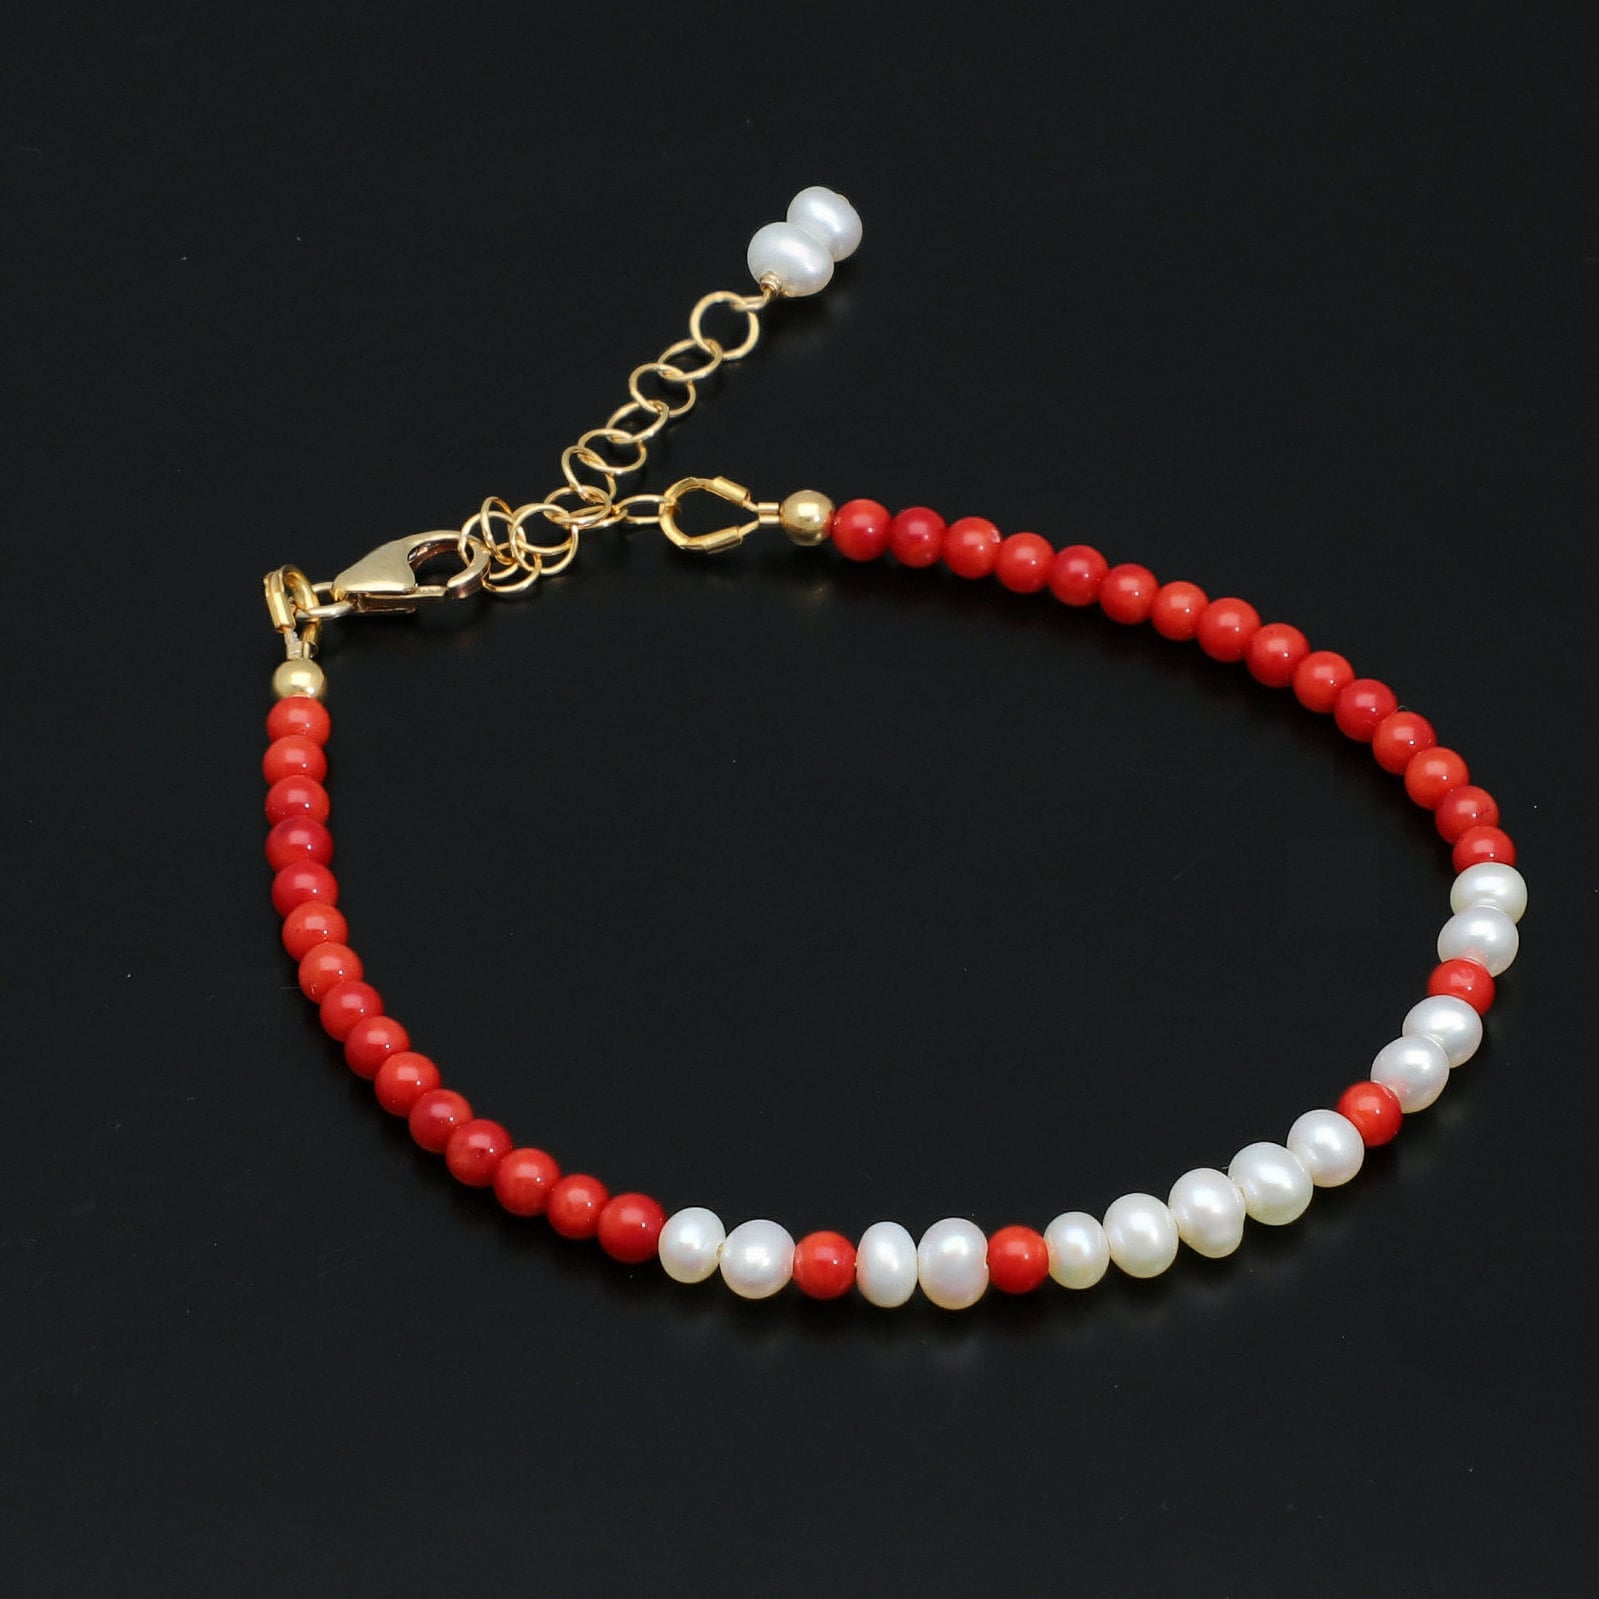 White Coral | Italian White Coral | Coral Beads